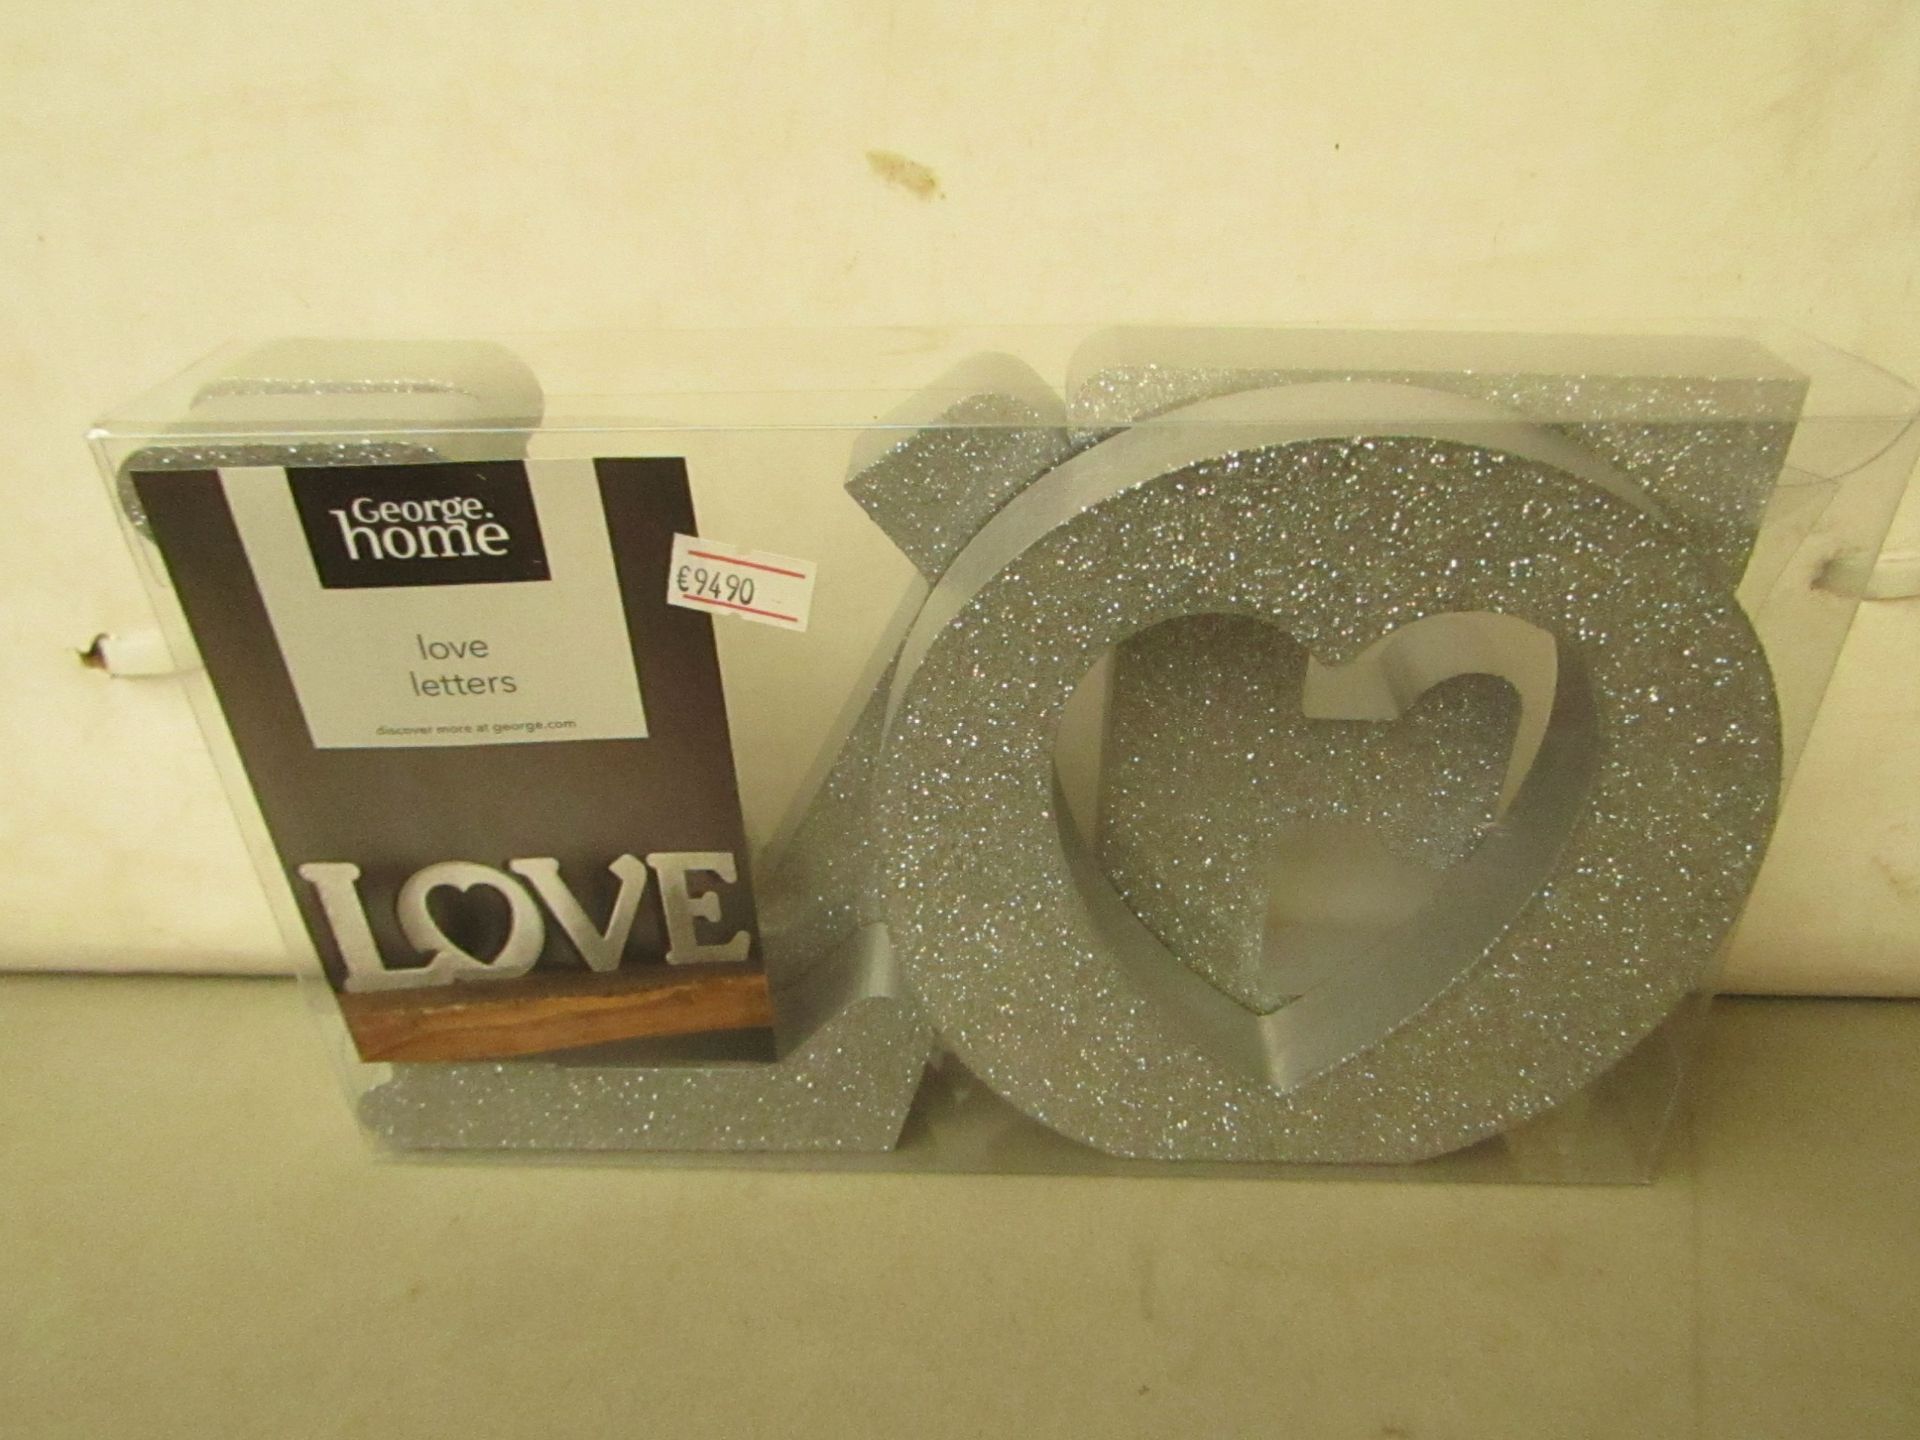 George Home - Sparkling Love Letter's - All Look New & Packaged.